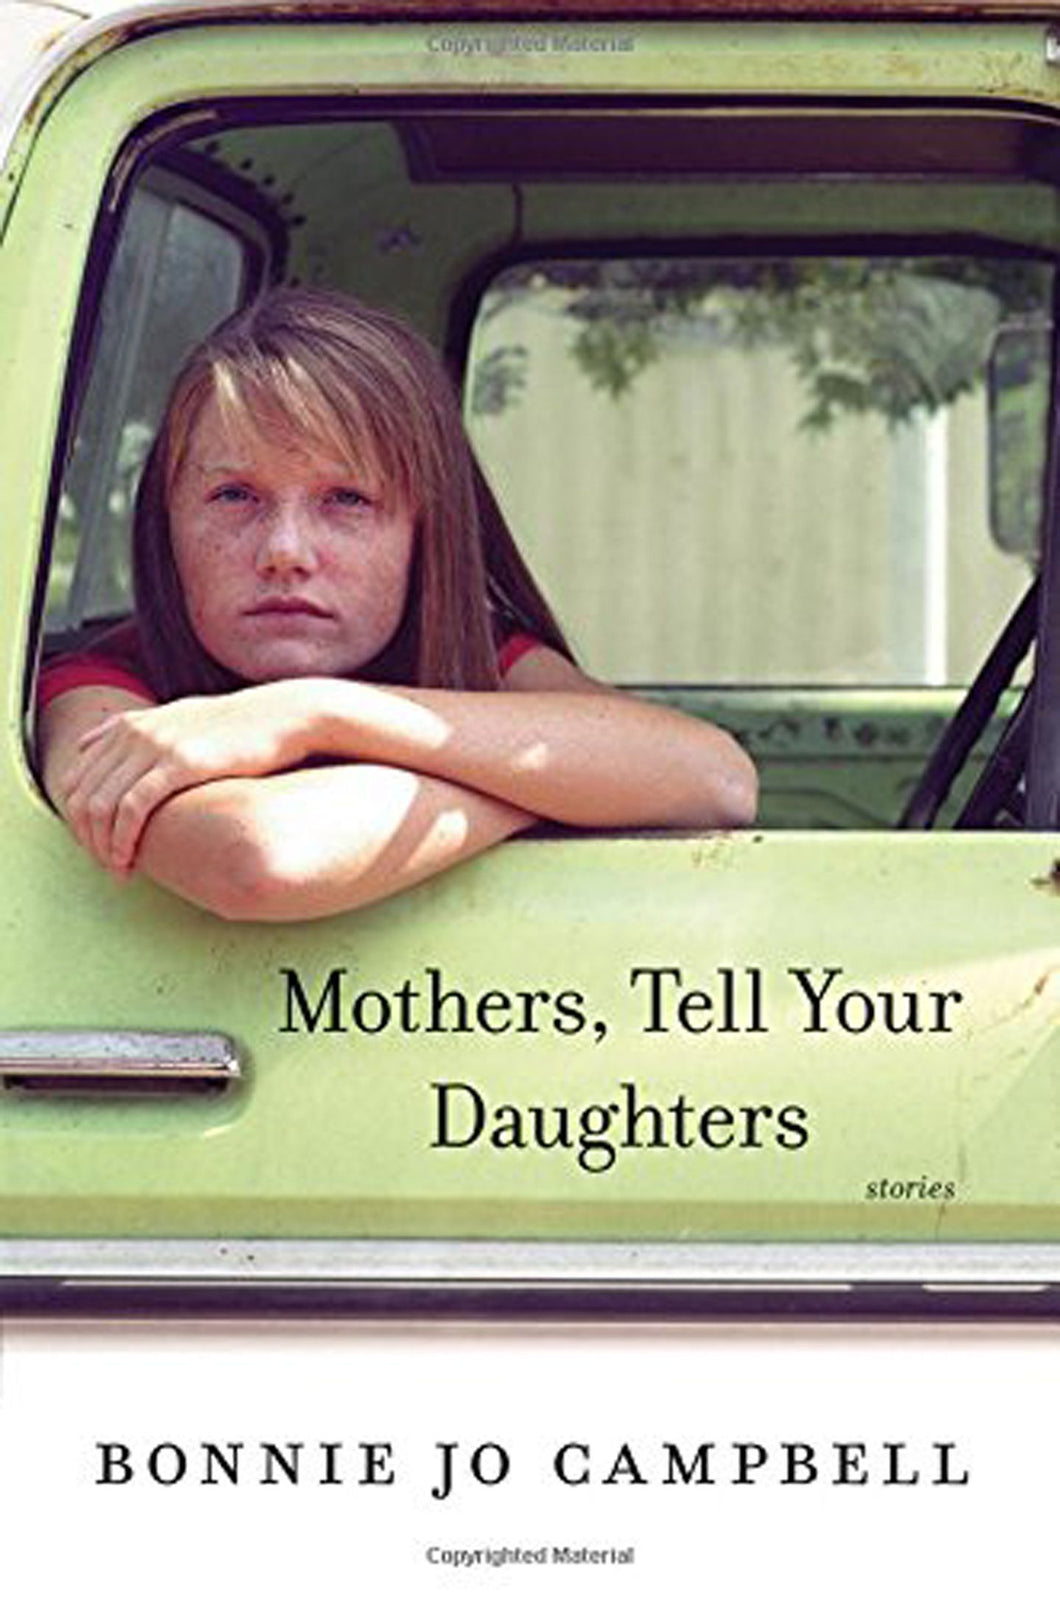 MOTHERS, TELL YOUR DAUGHTERS - Bonnie Jo Campbell